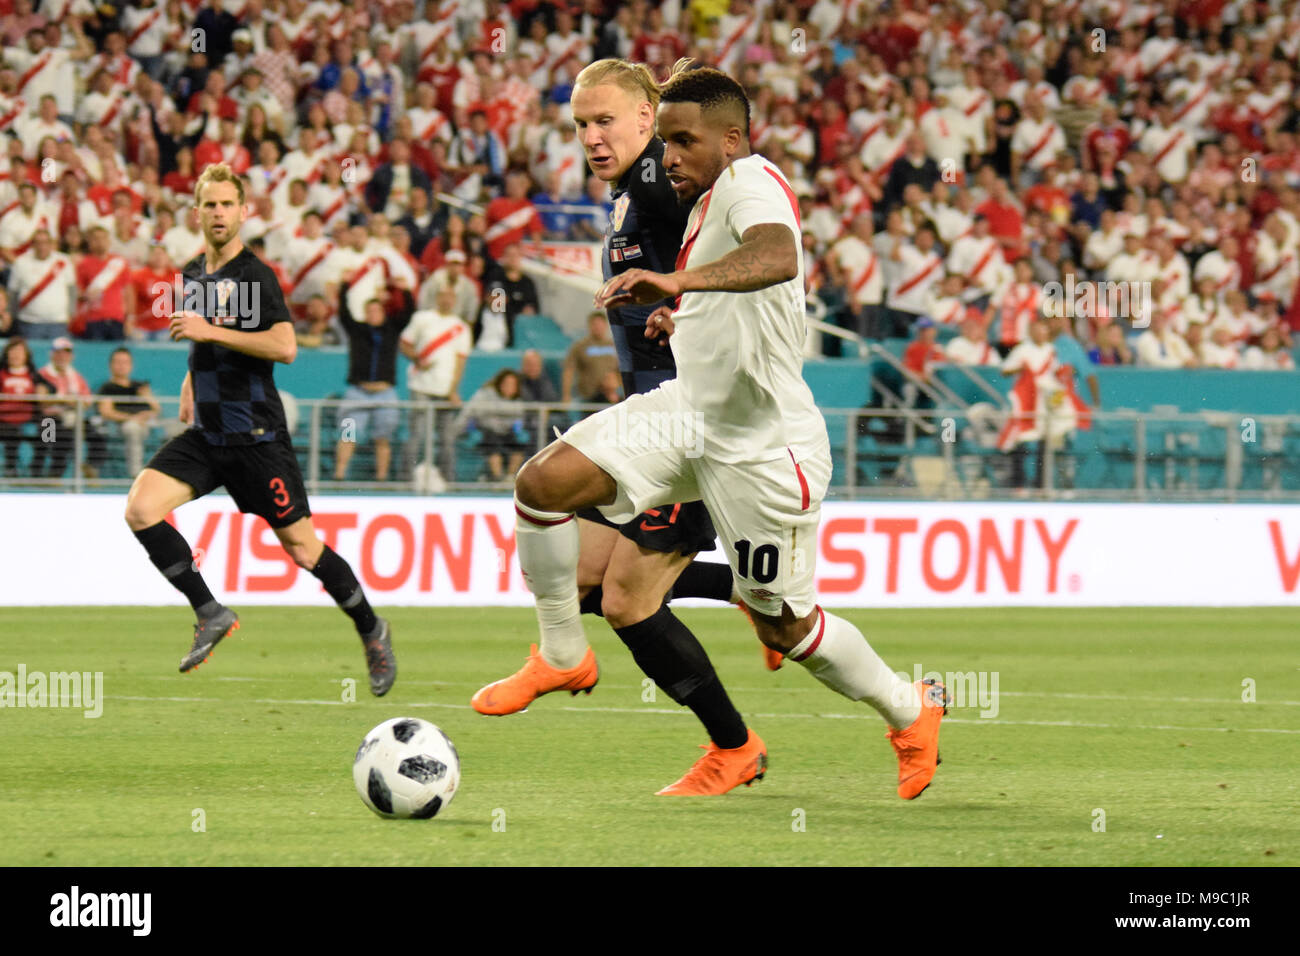 Miami, Florida, USA. 23rd Mar, 2018. Edison Flores against attack against Domagoj Vida who could not contain it and thus scored the second goal for the Peruvian team.The Croatian national football team played a friendly match against Peru on 23rd March 2018. Credit: Fernando Oduber/SOPA Images/ZUMA Wire/Alamy Live News Stock Photo